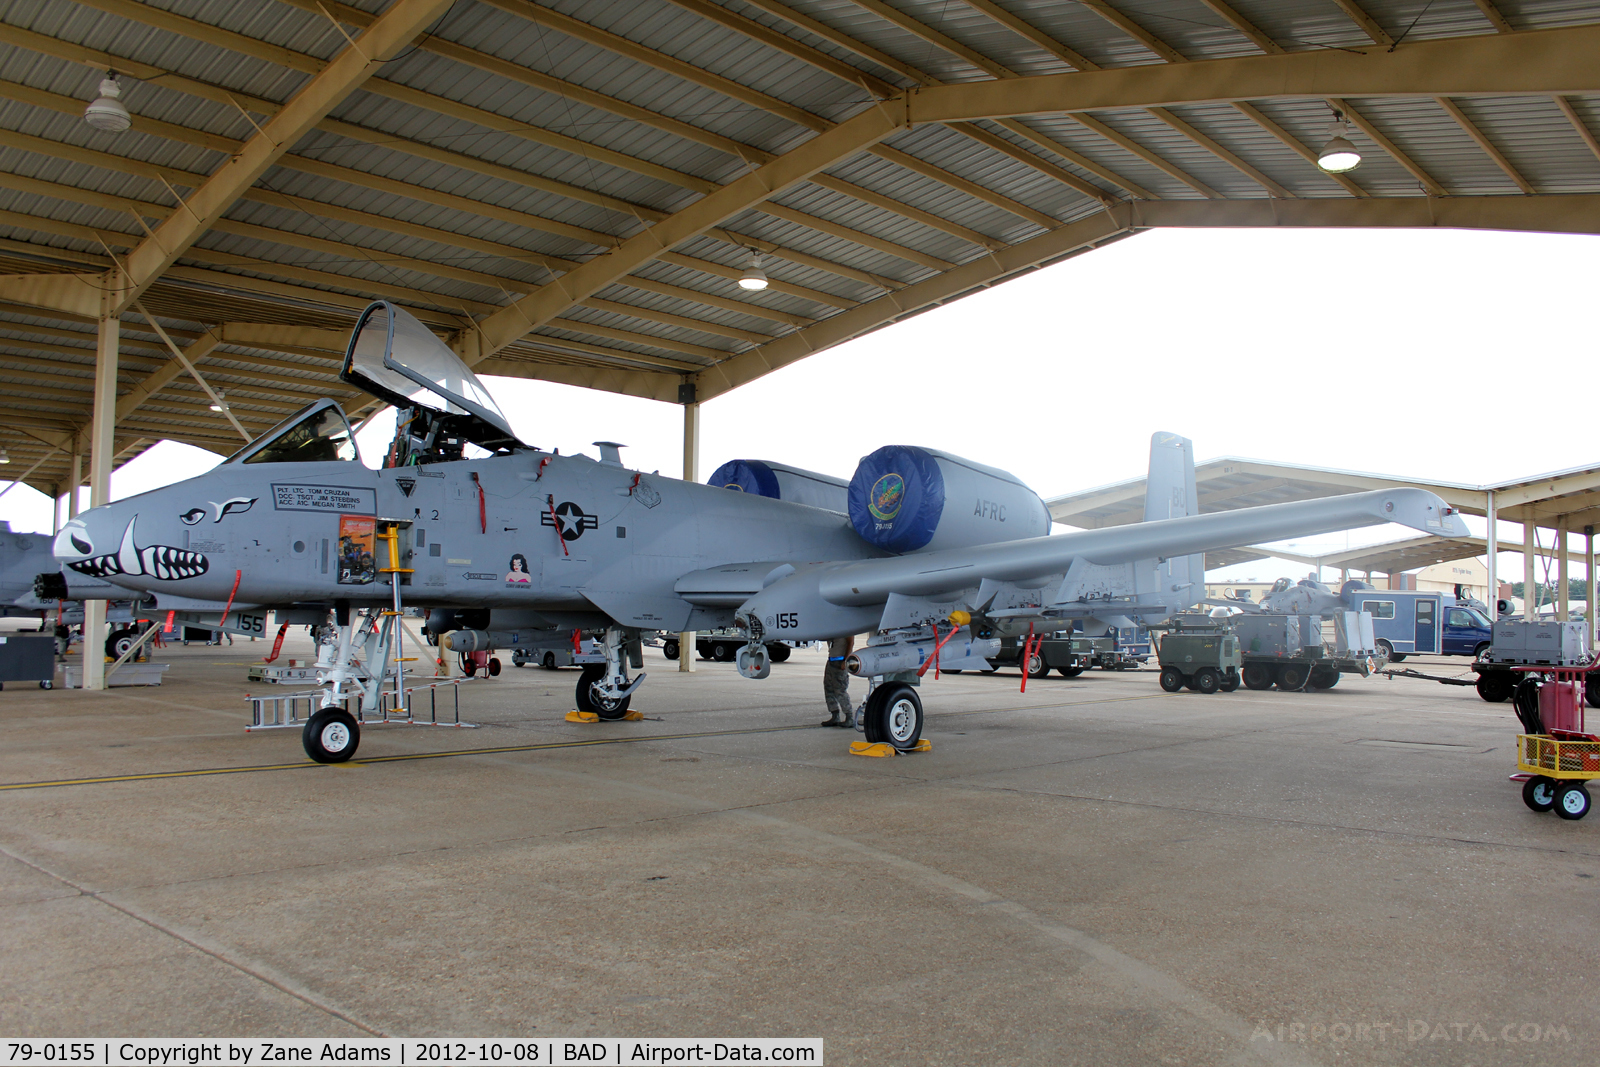 79-0155, 1979 Fairchild Republic A-10C Thunderbolt II C/N A10-0419, At Barksdale Air Force Base -47th Fighter Squadron